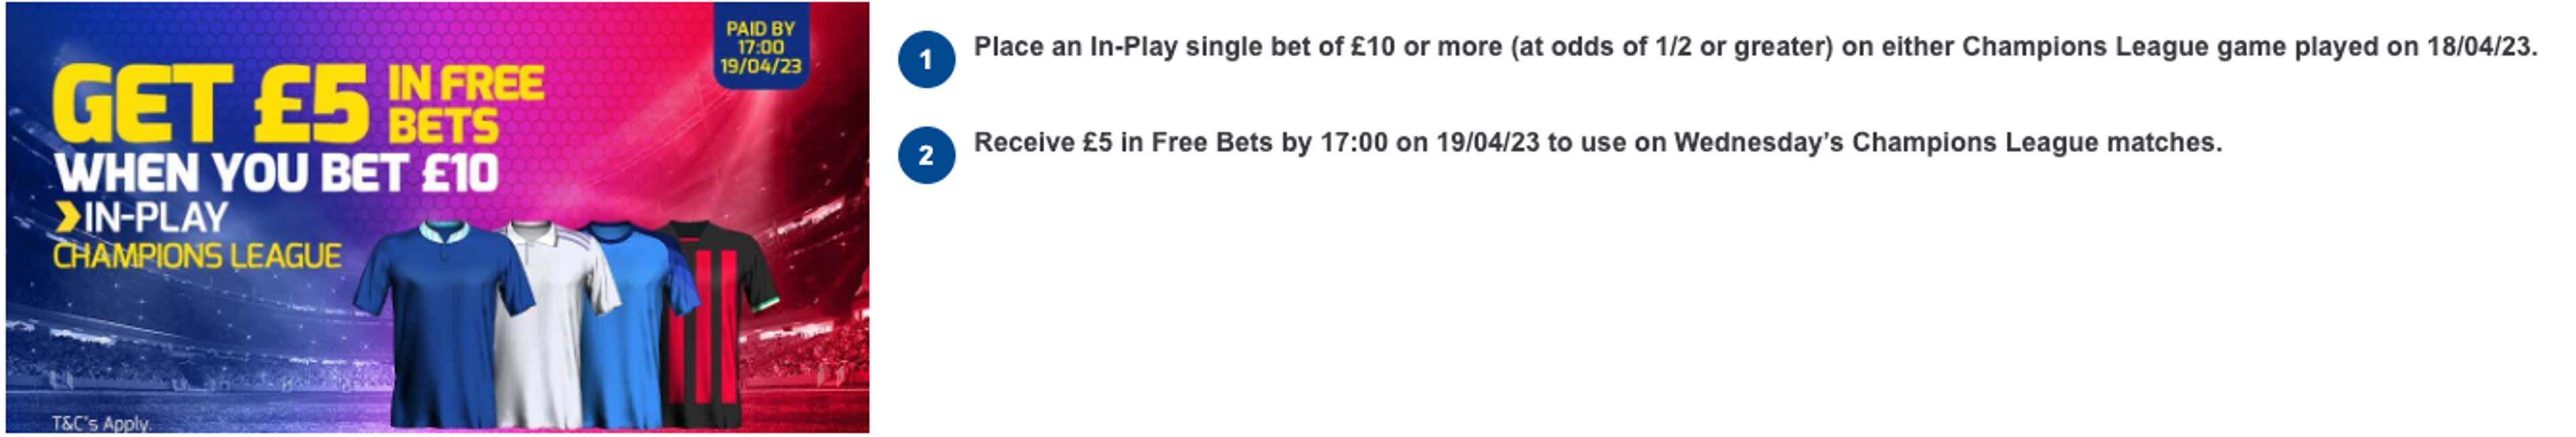 Bet and Get Betfred Image 